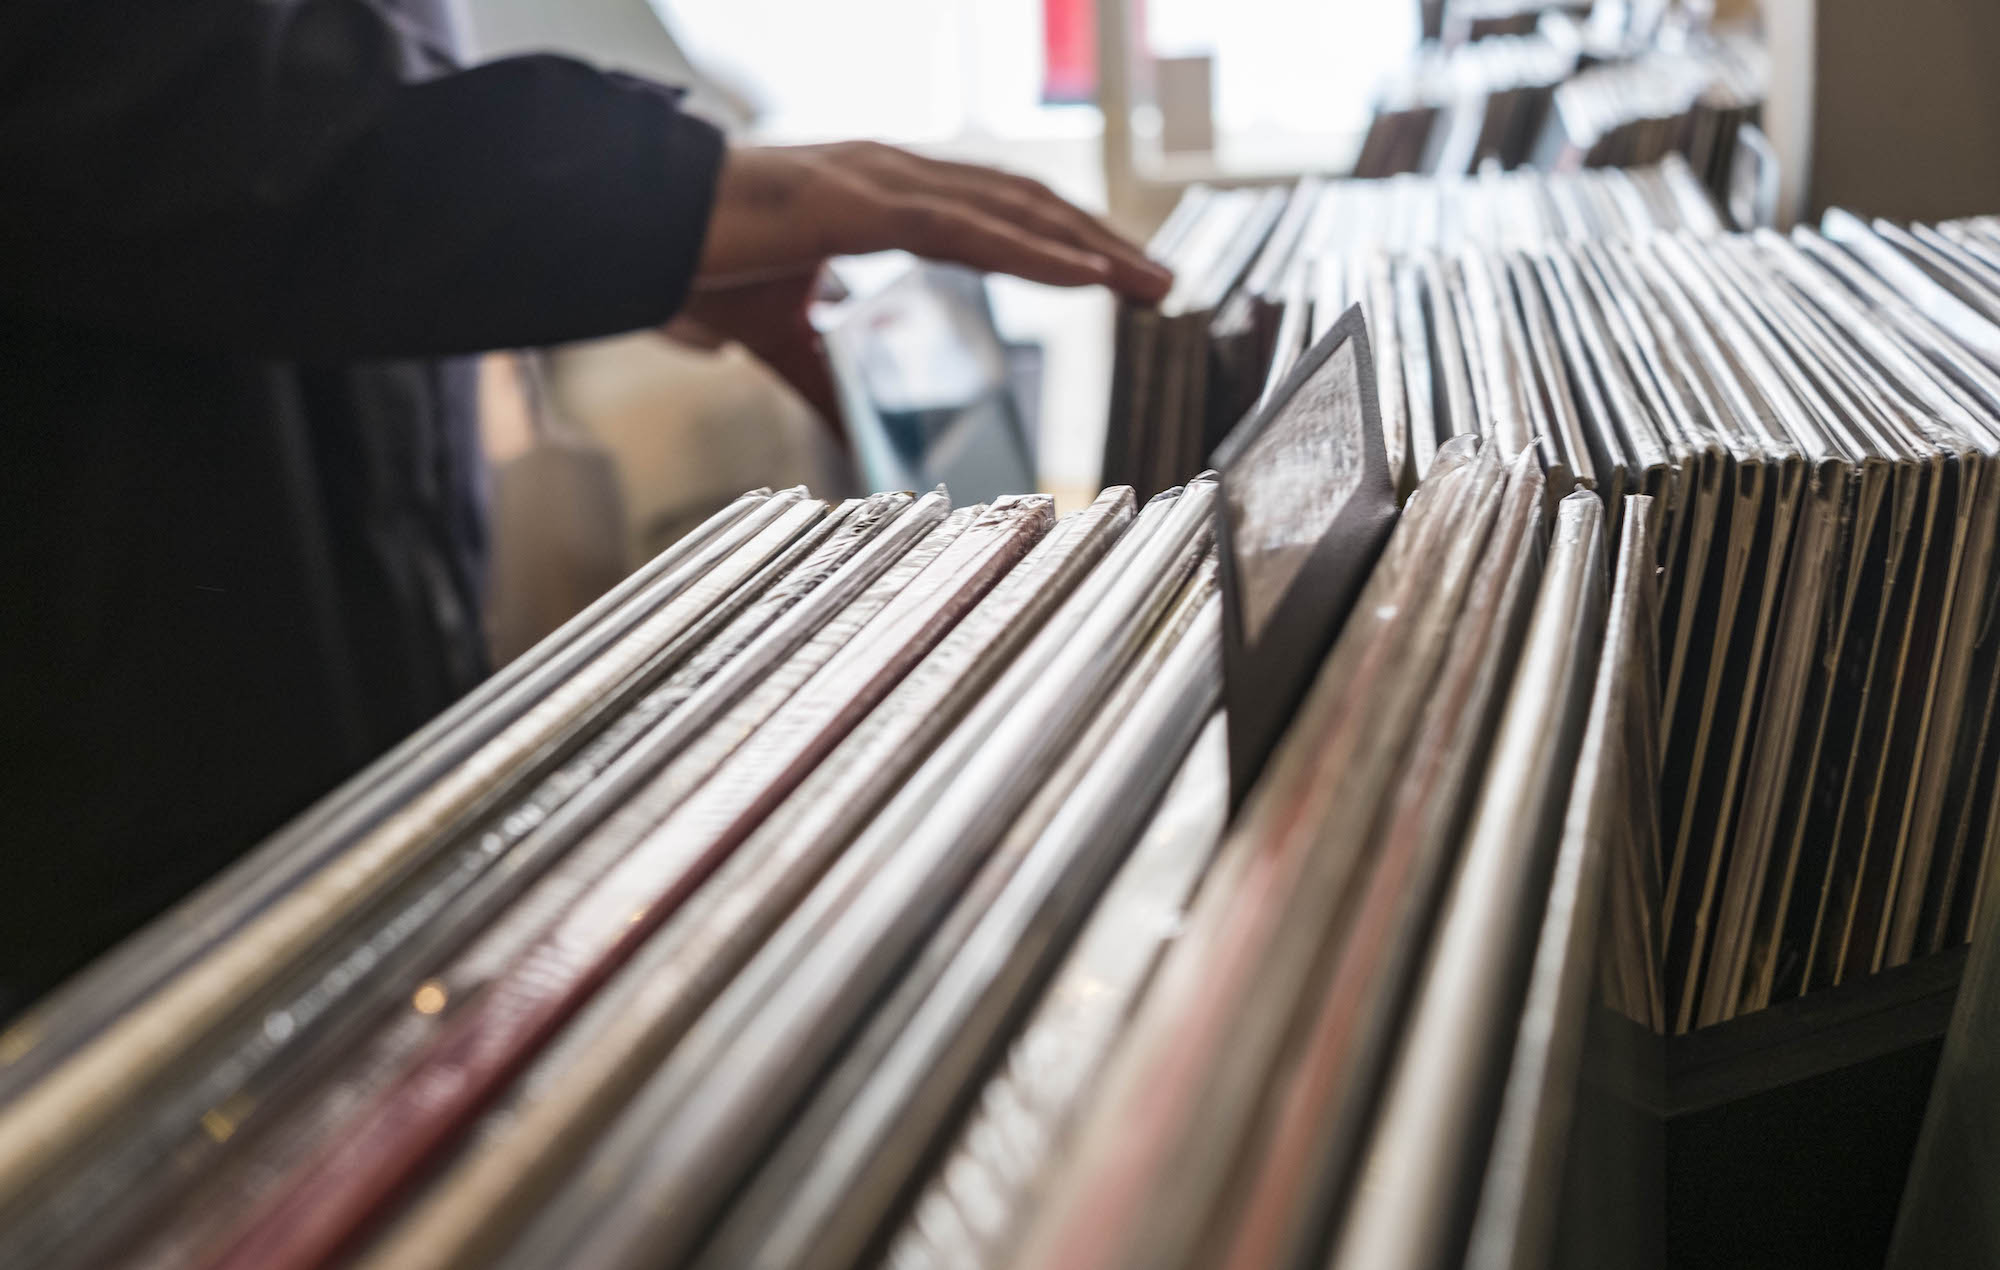 Vinyl distributor and record store Unearthed Sounds to close this month